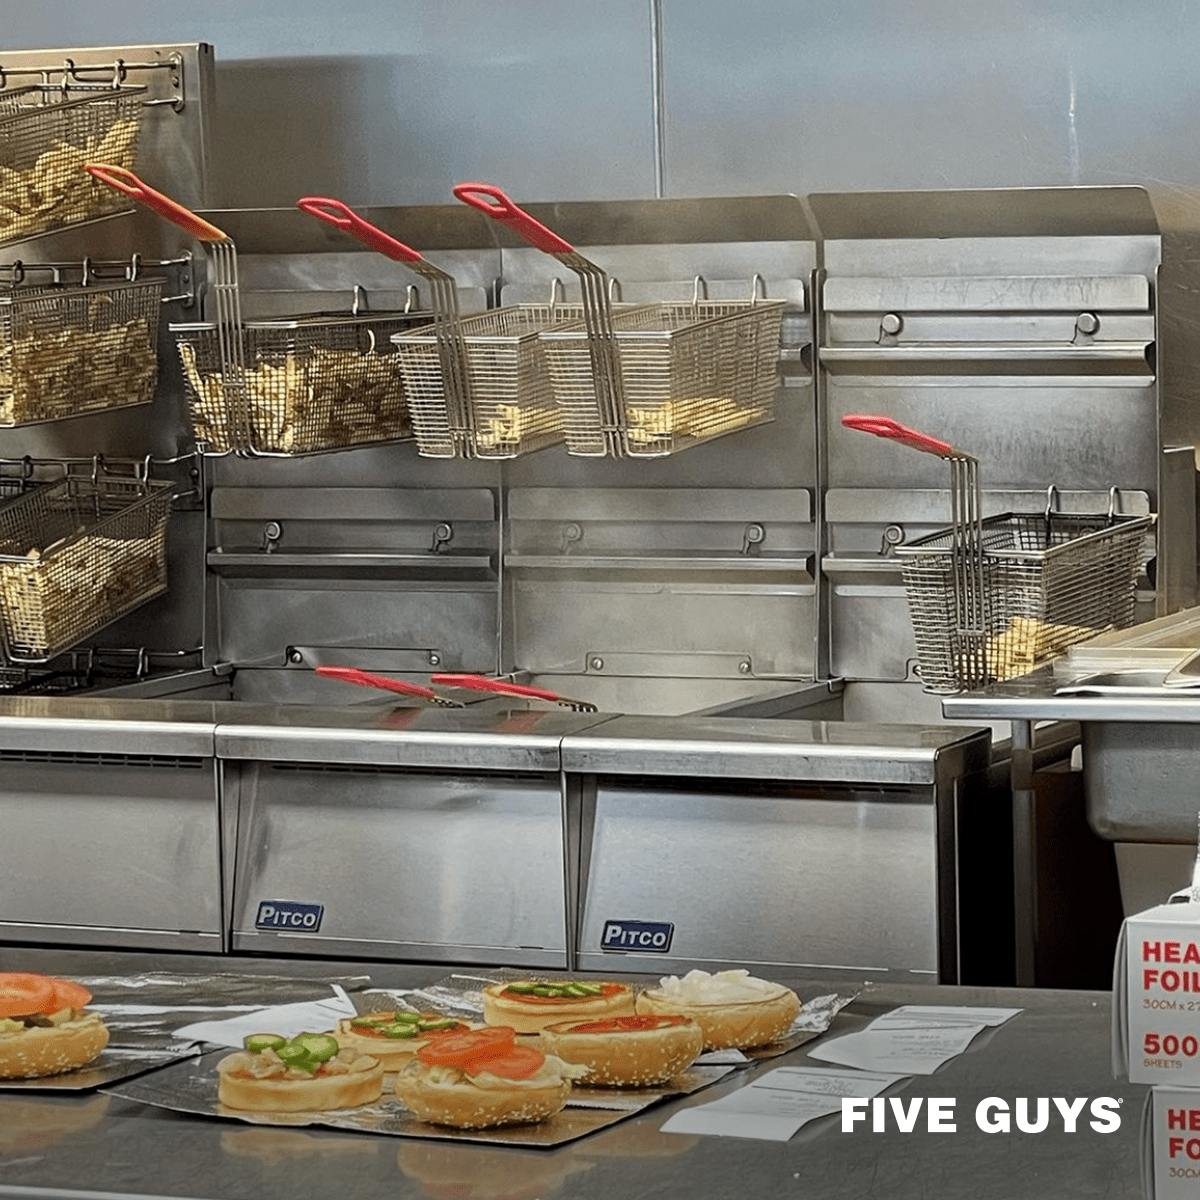 burgers being made with the quality of the Five Guys brand